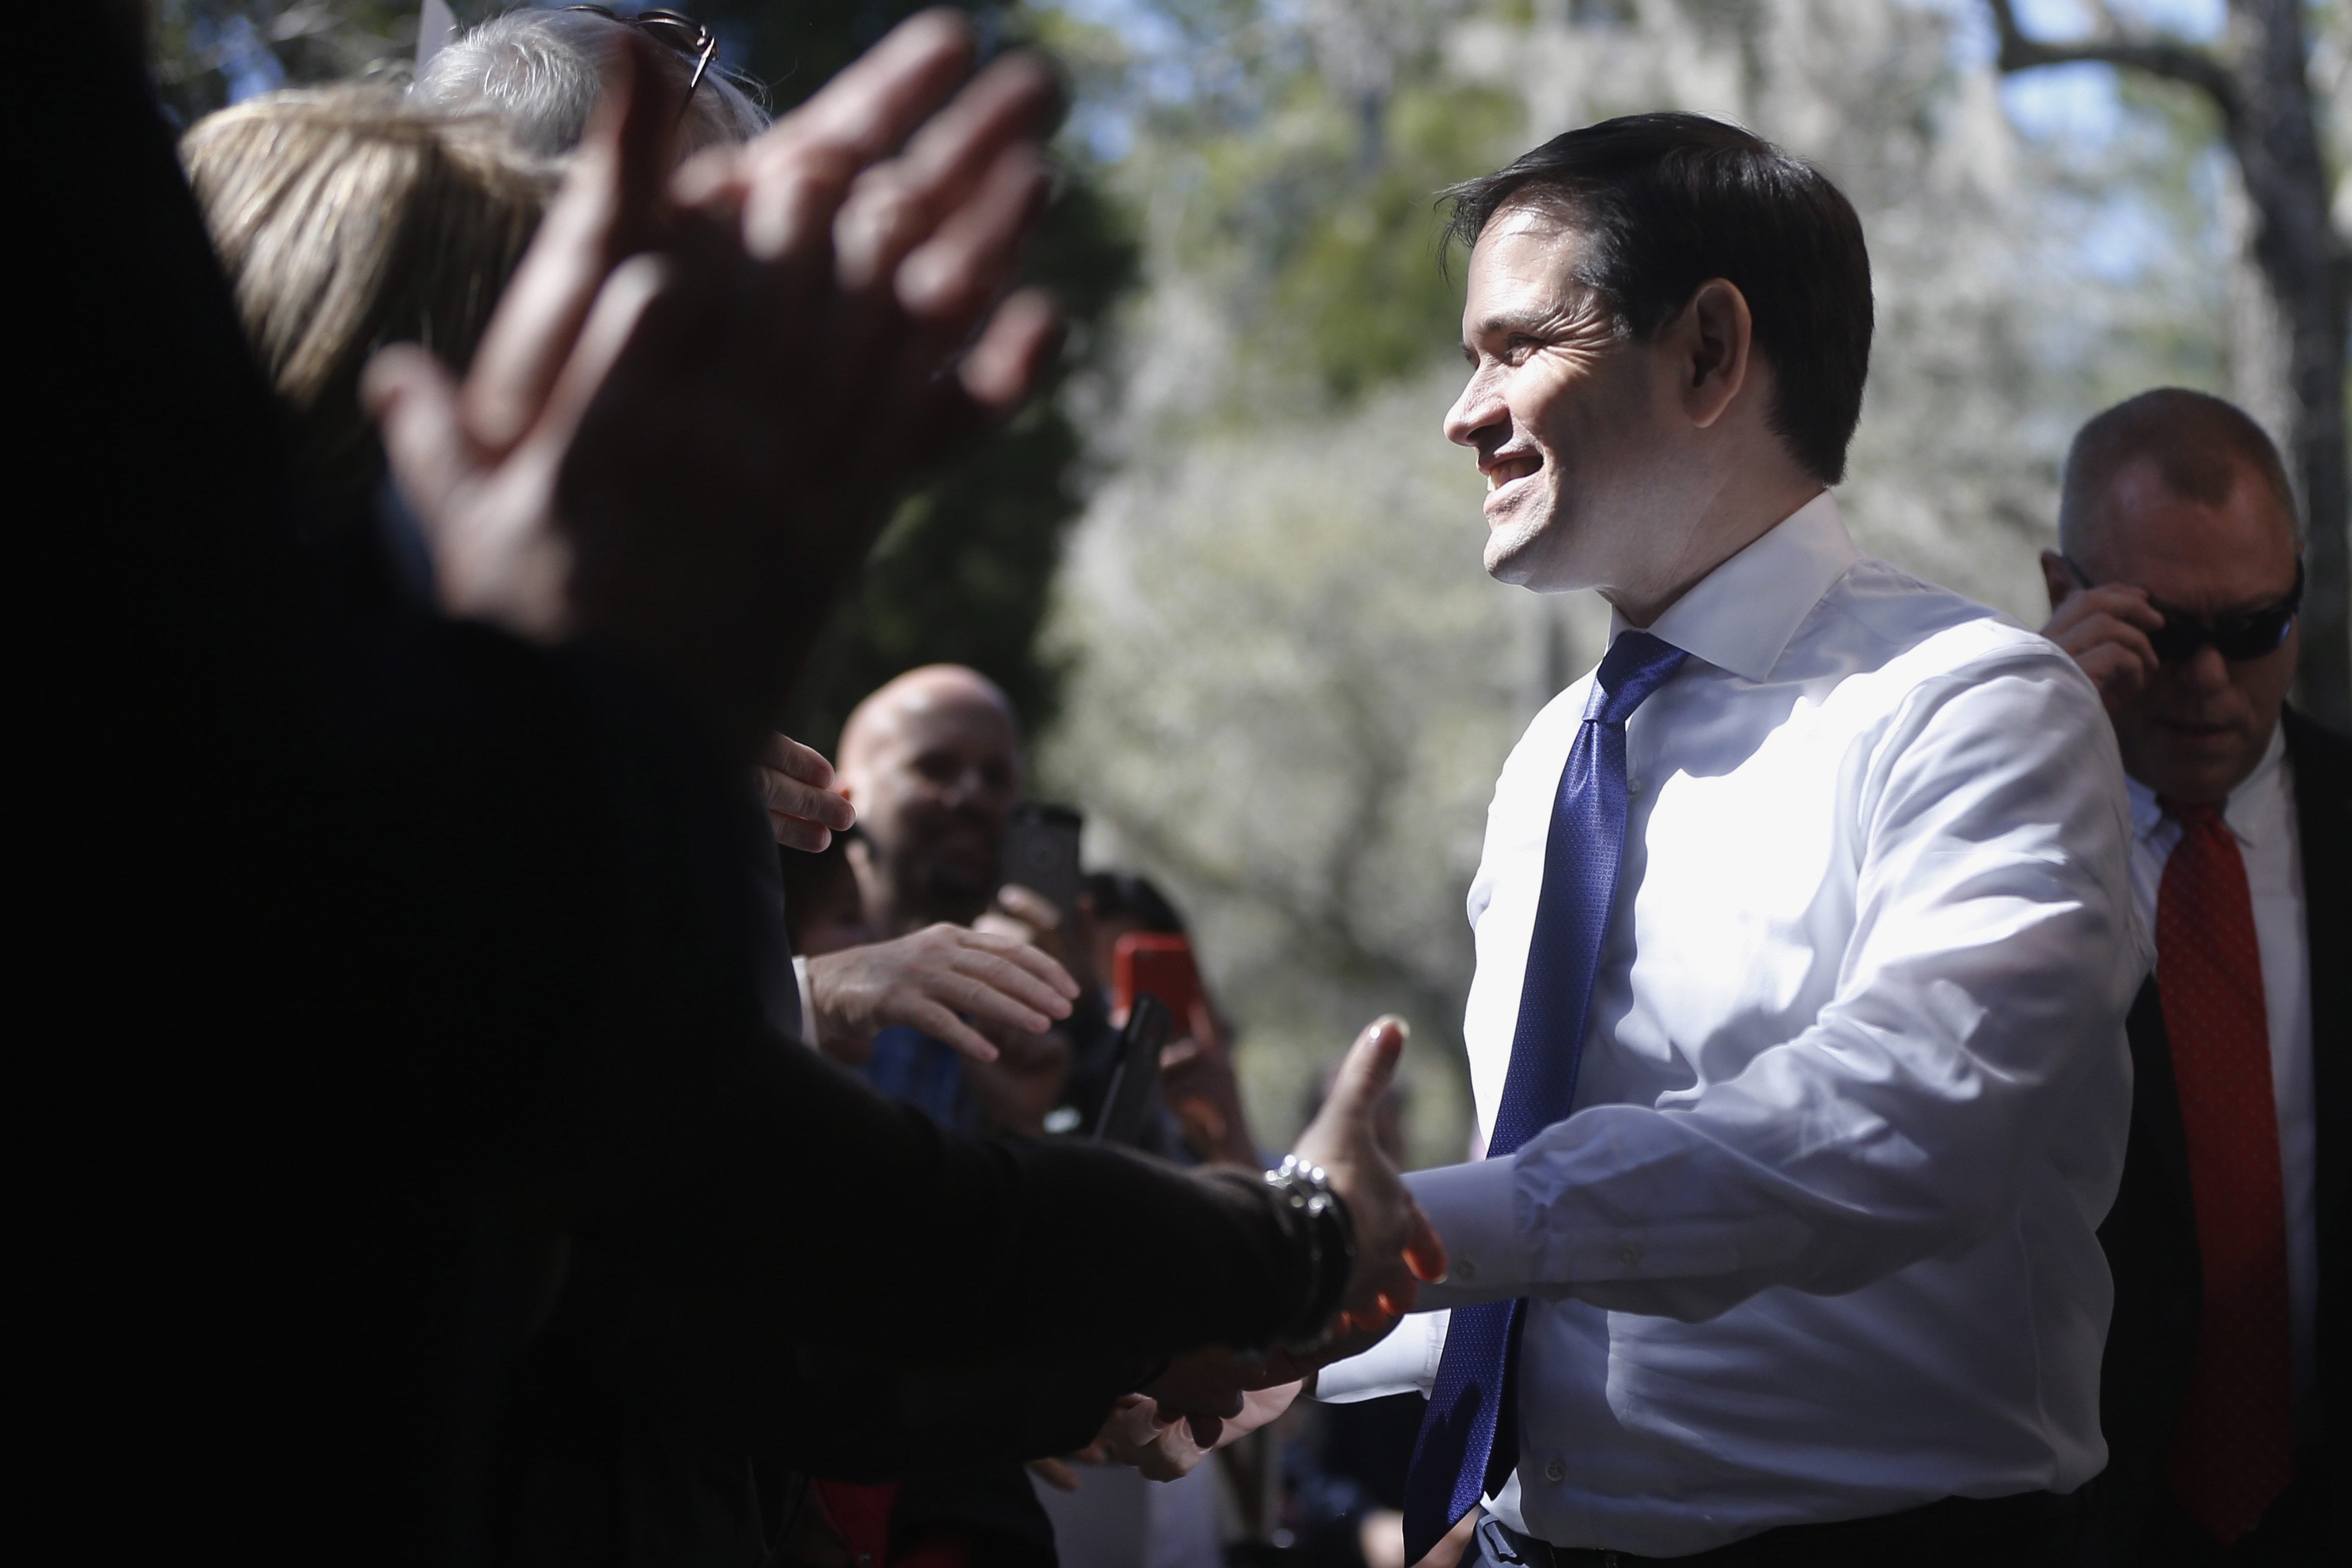 Sen. Marco Rubio, R-Fla., arrives for a campaign stop Tuesday in Summerville, S.C.